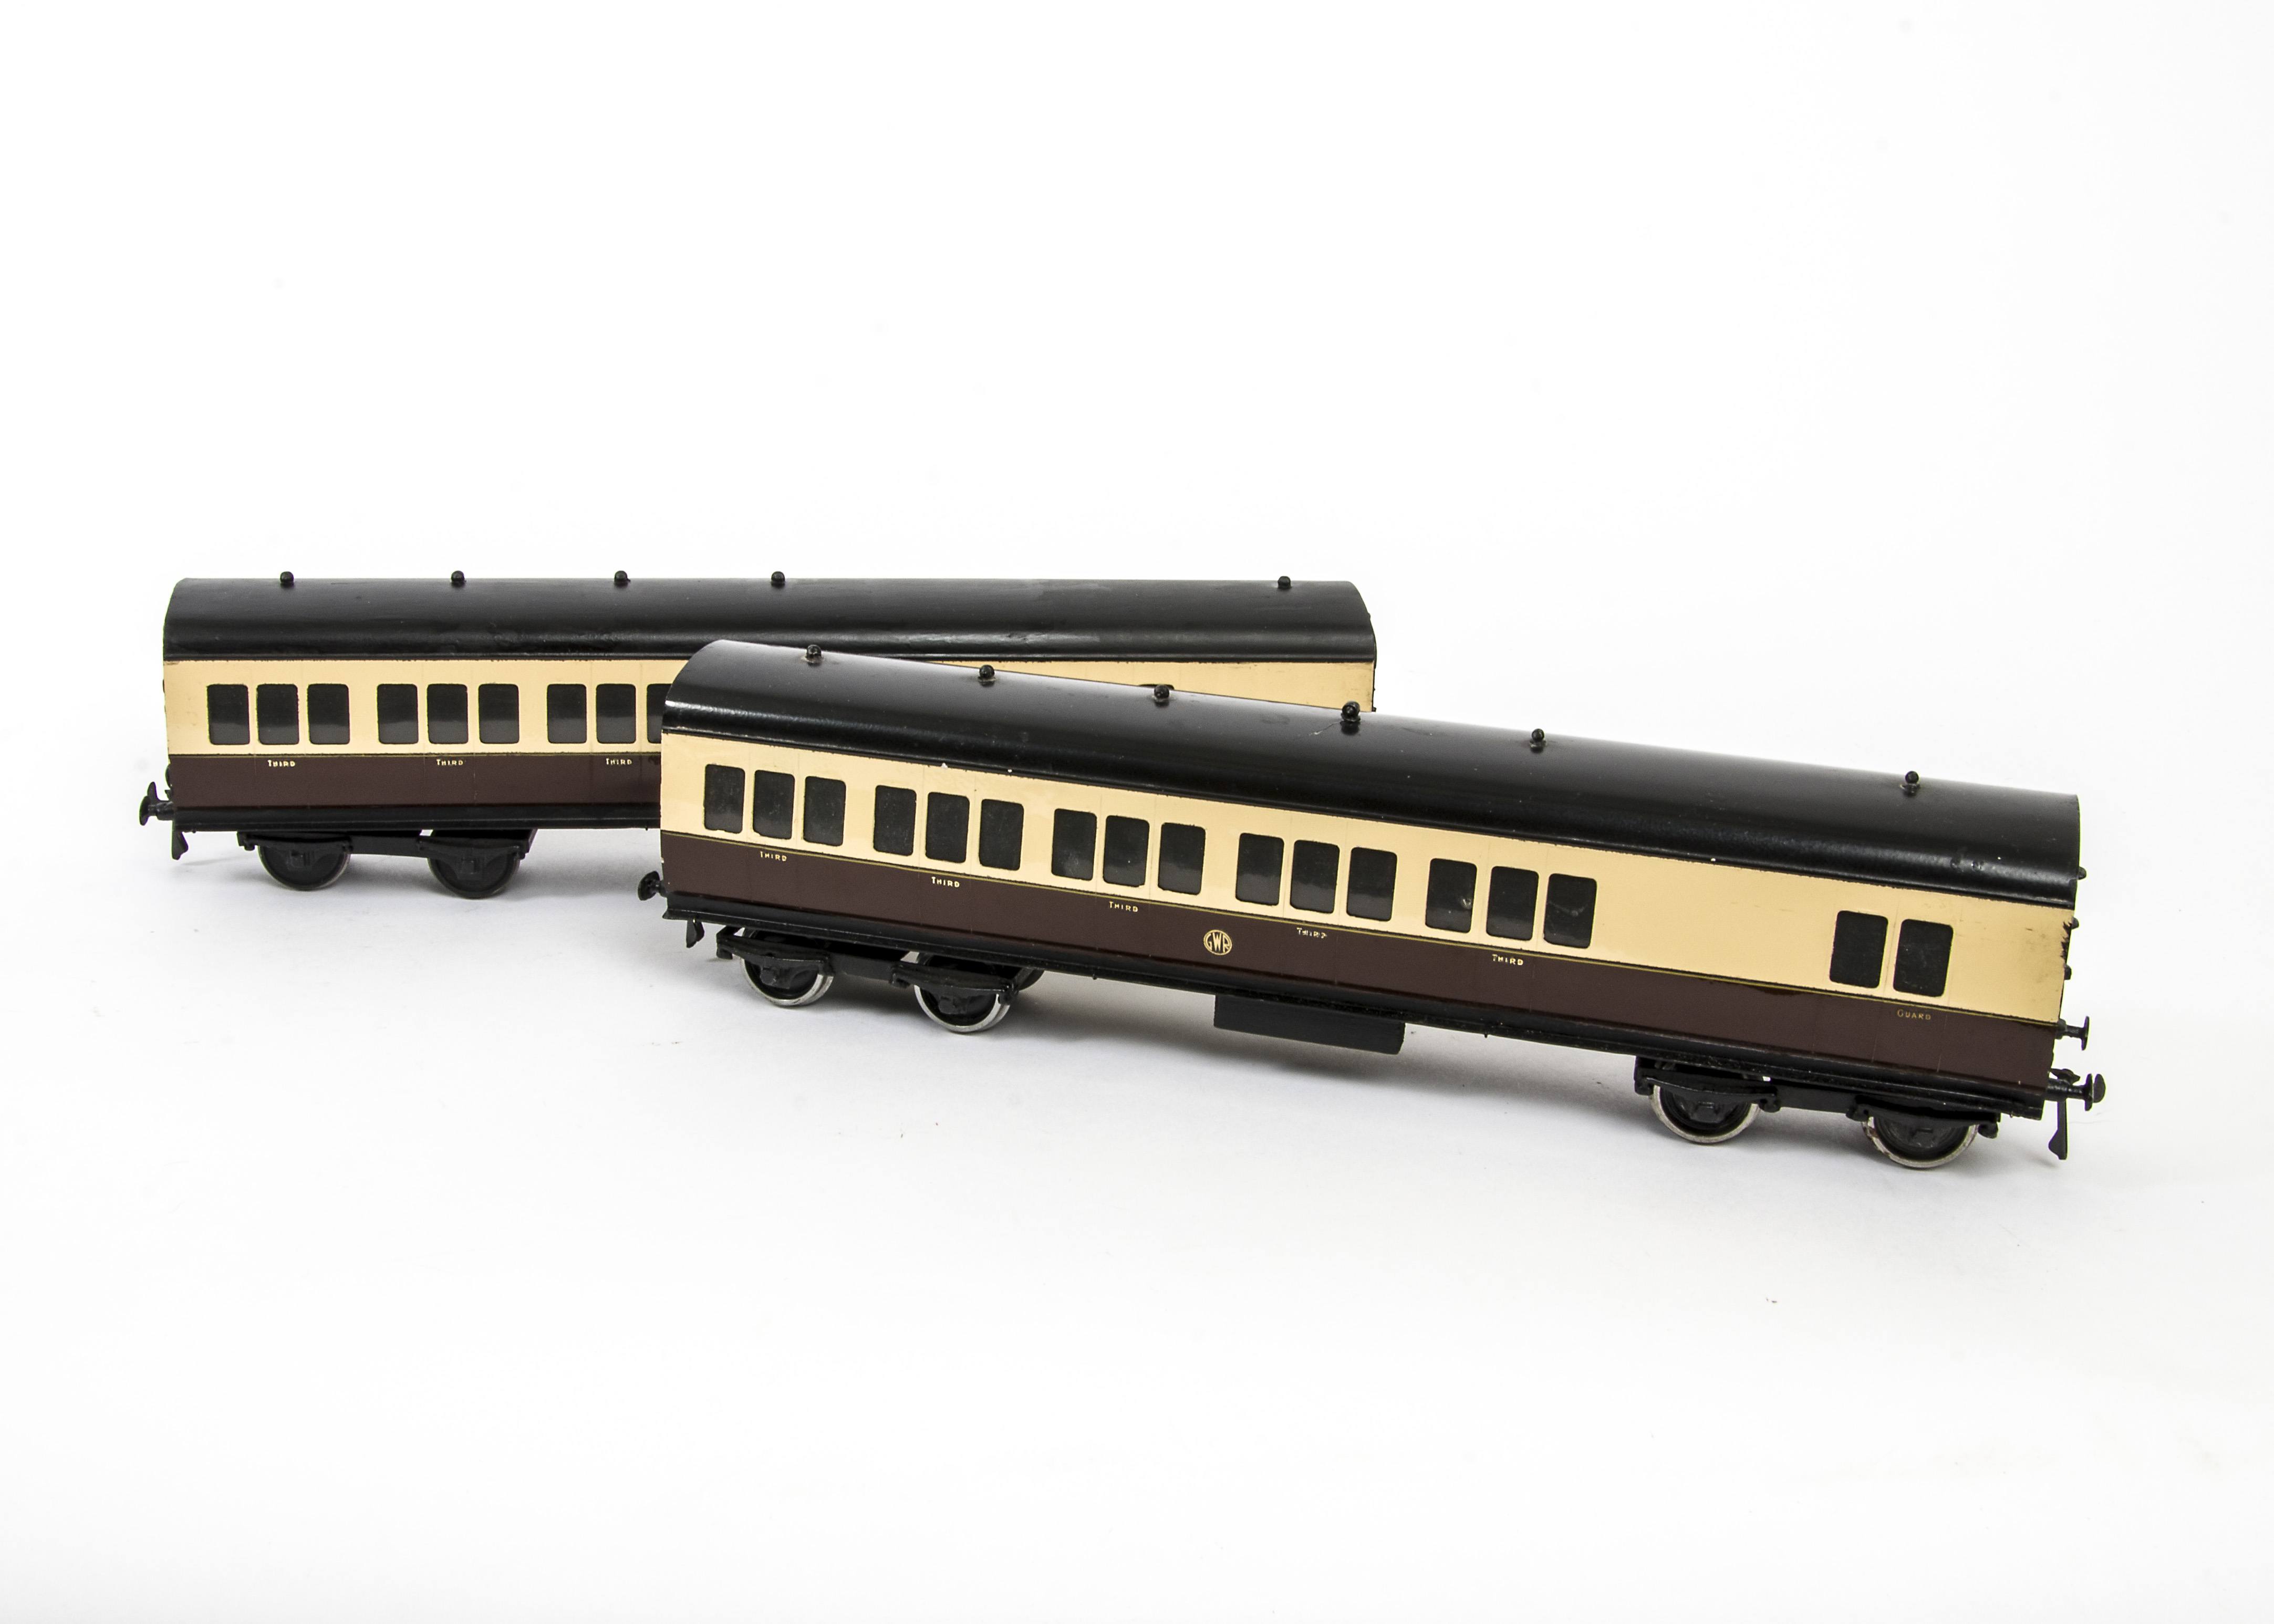 A Pair of Kitbuilt Finescale O Gauge GWR Brake/3rd Non-corridor Coaches, with unidentified kit